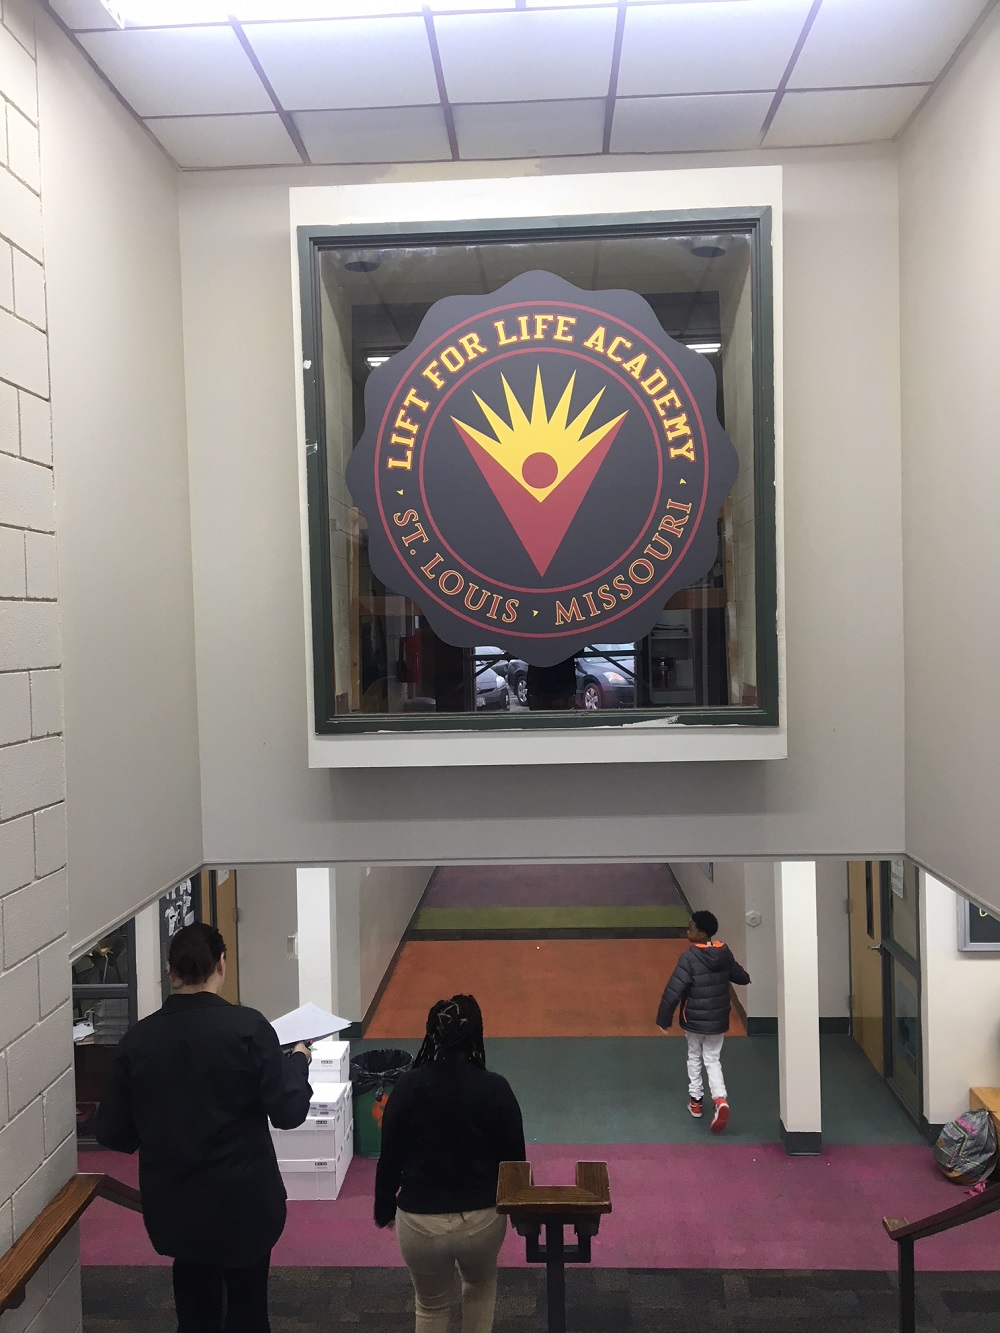 A large window graphic custom made for the Lift For Life Academy in St. Louis, Missouri.